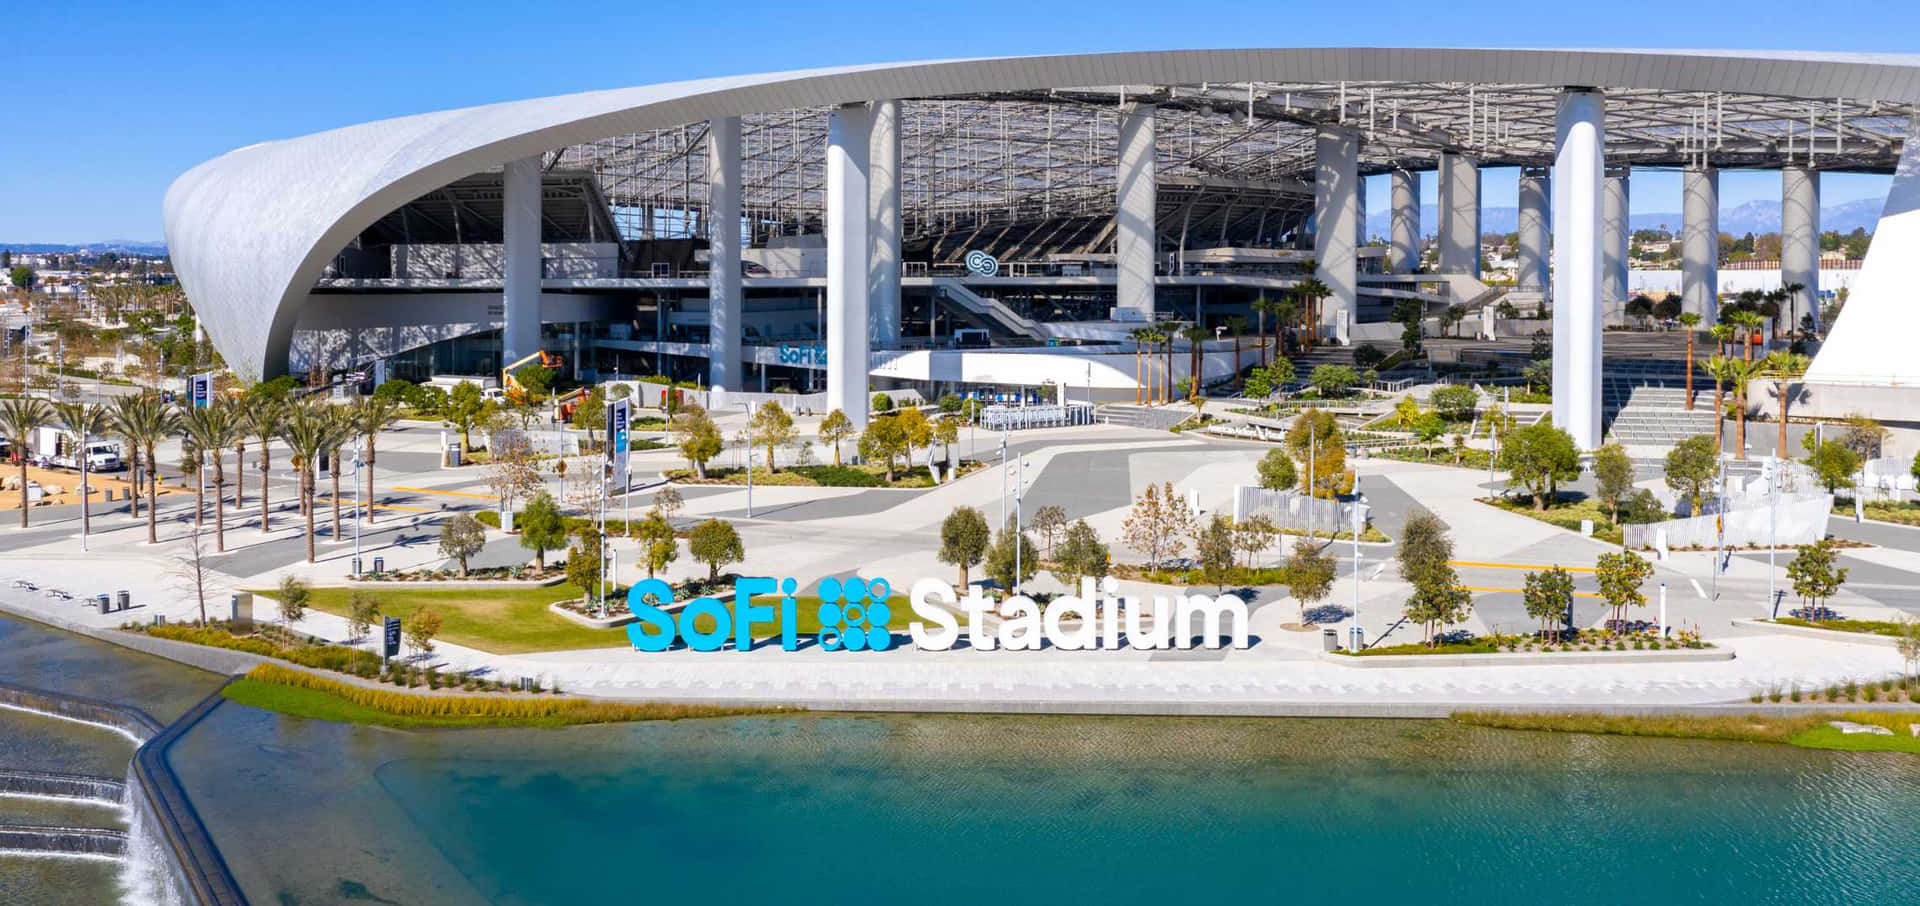 Be in the middle of all the action at SoFi Stadium, the largest in the NFL